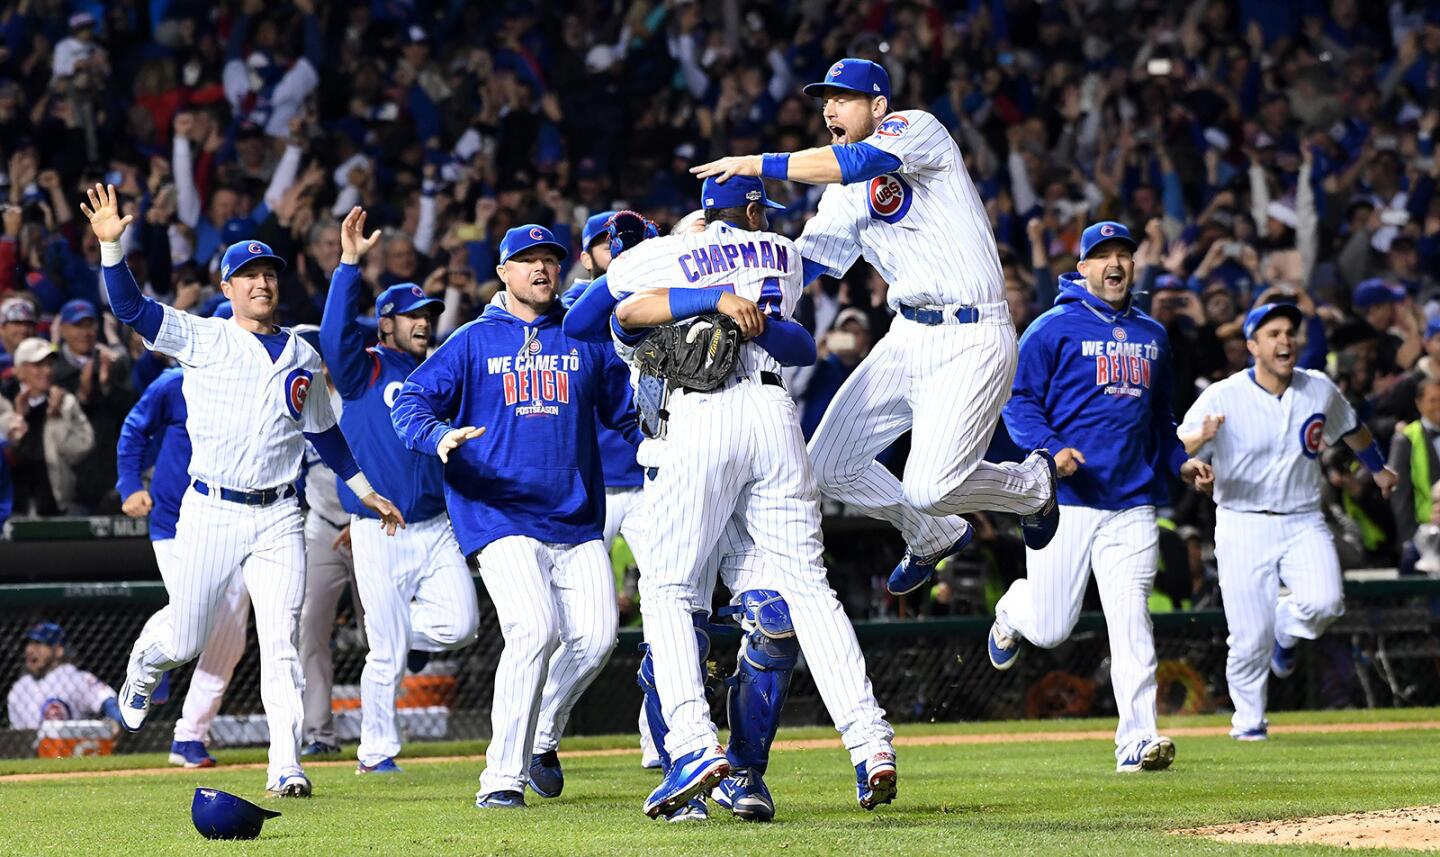 Cubs players celebrate after defeating the Dodgers in Game 6 of the NLCS at Wrigley Field in Chicago.